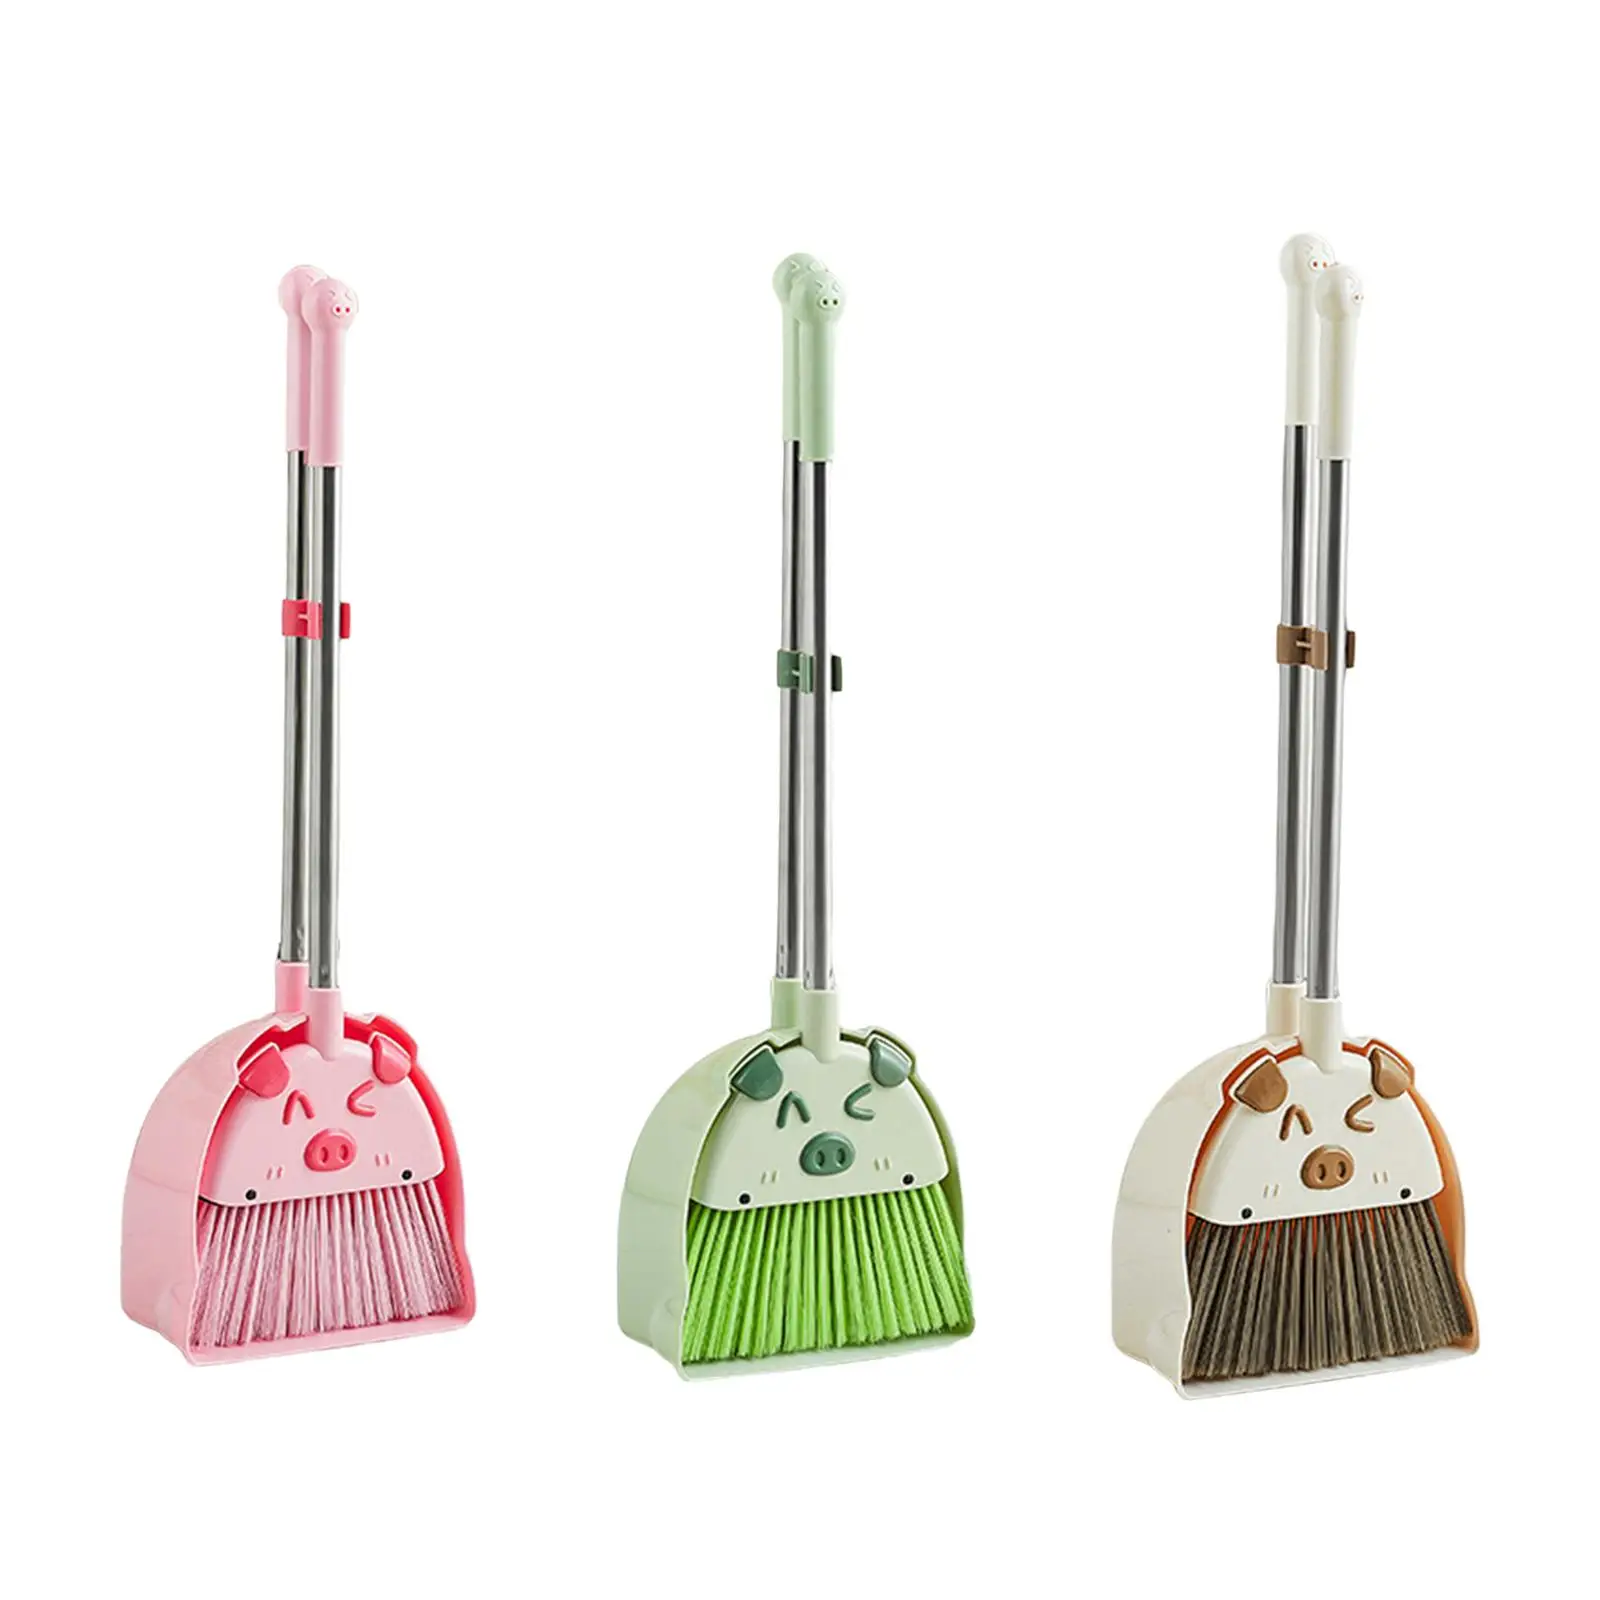 Kids Broom Dustpan Set Children Sweeping House Cleaning Toy Set for Age 3-6